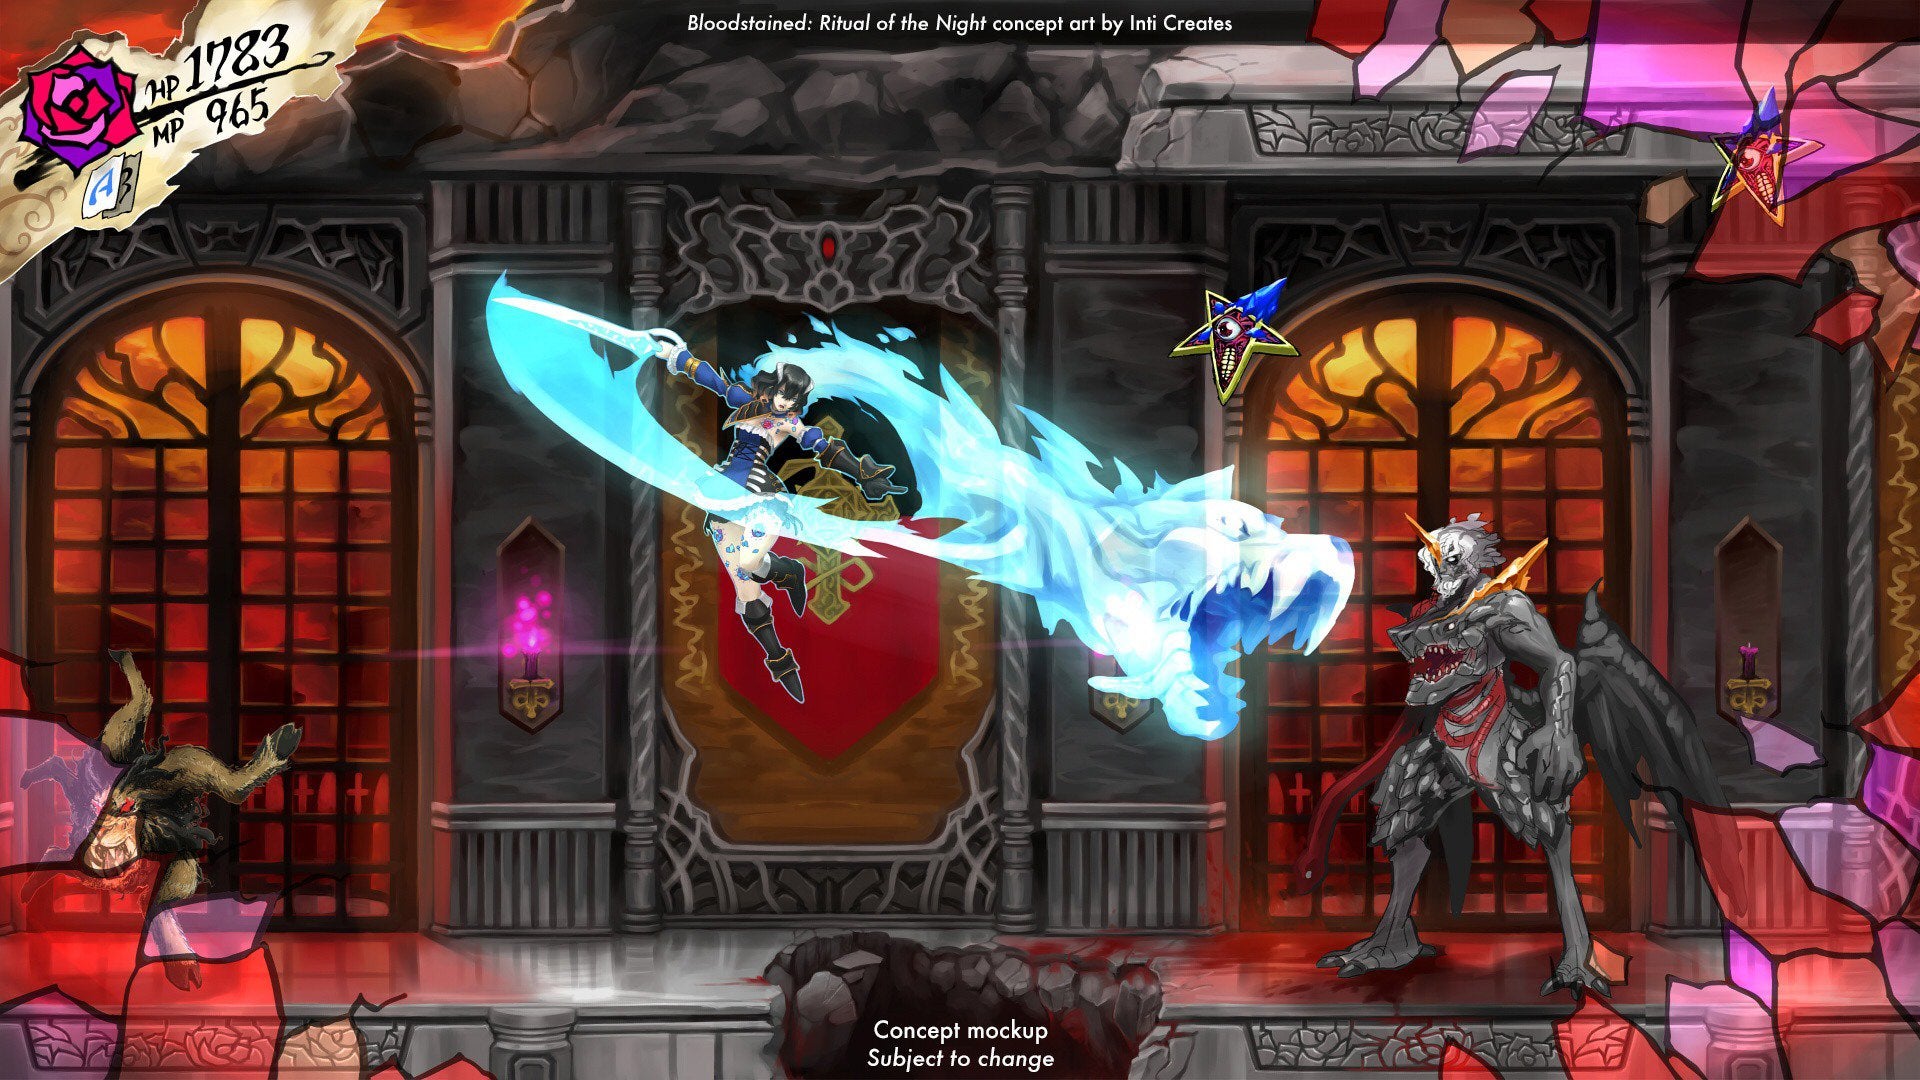 Image for Bloodstained: Ritual of the Night already funded on Kickstarter